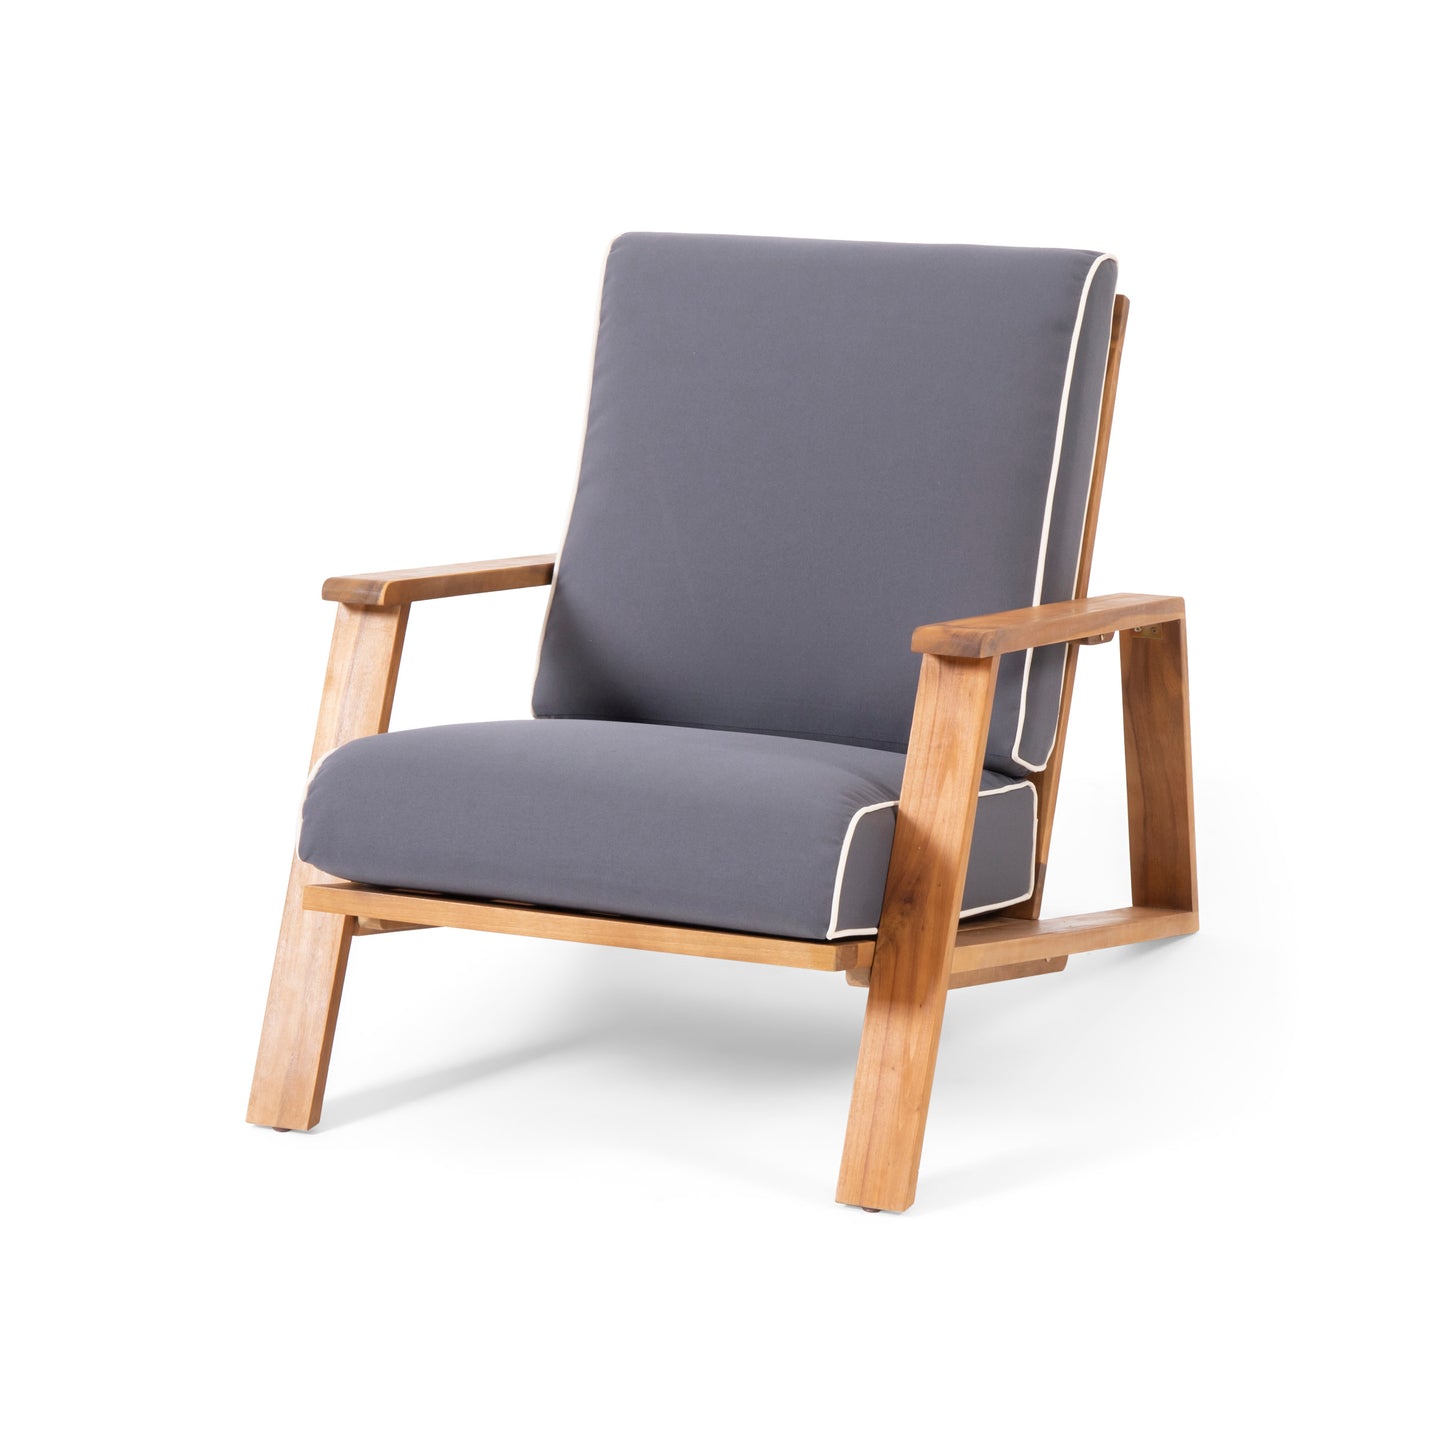 Youssef Outdoor Acacia Wood Club Chair with Cushion